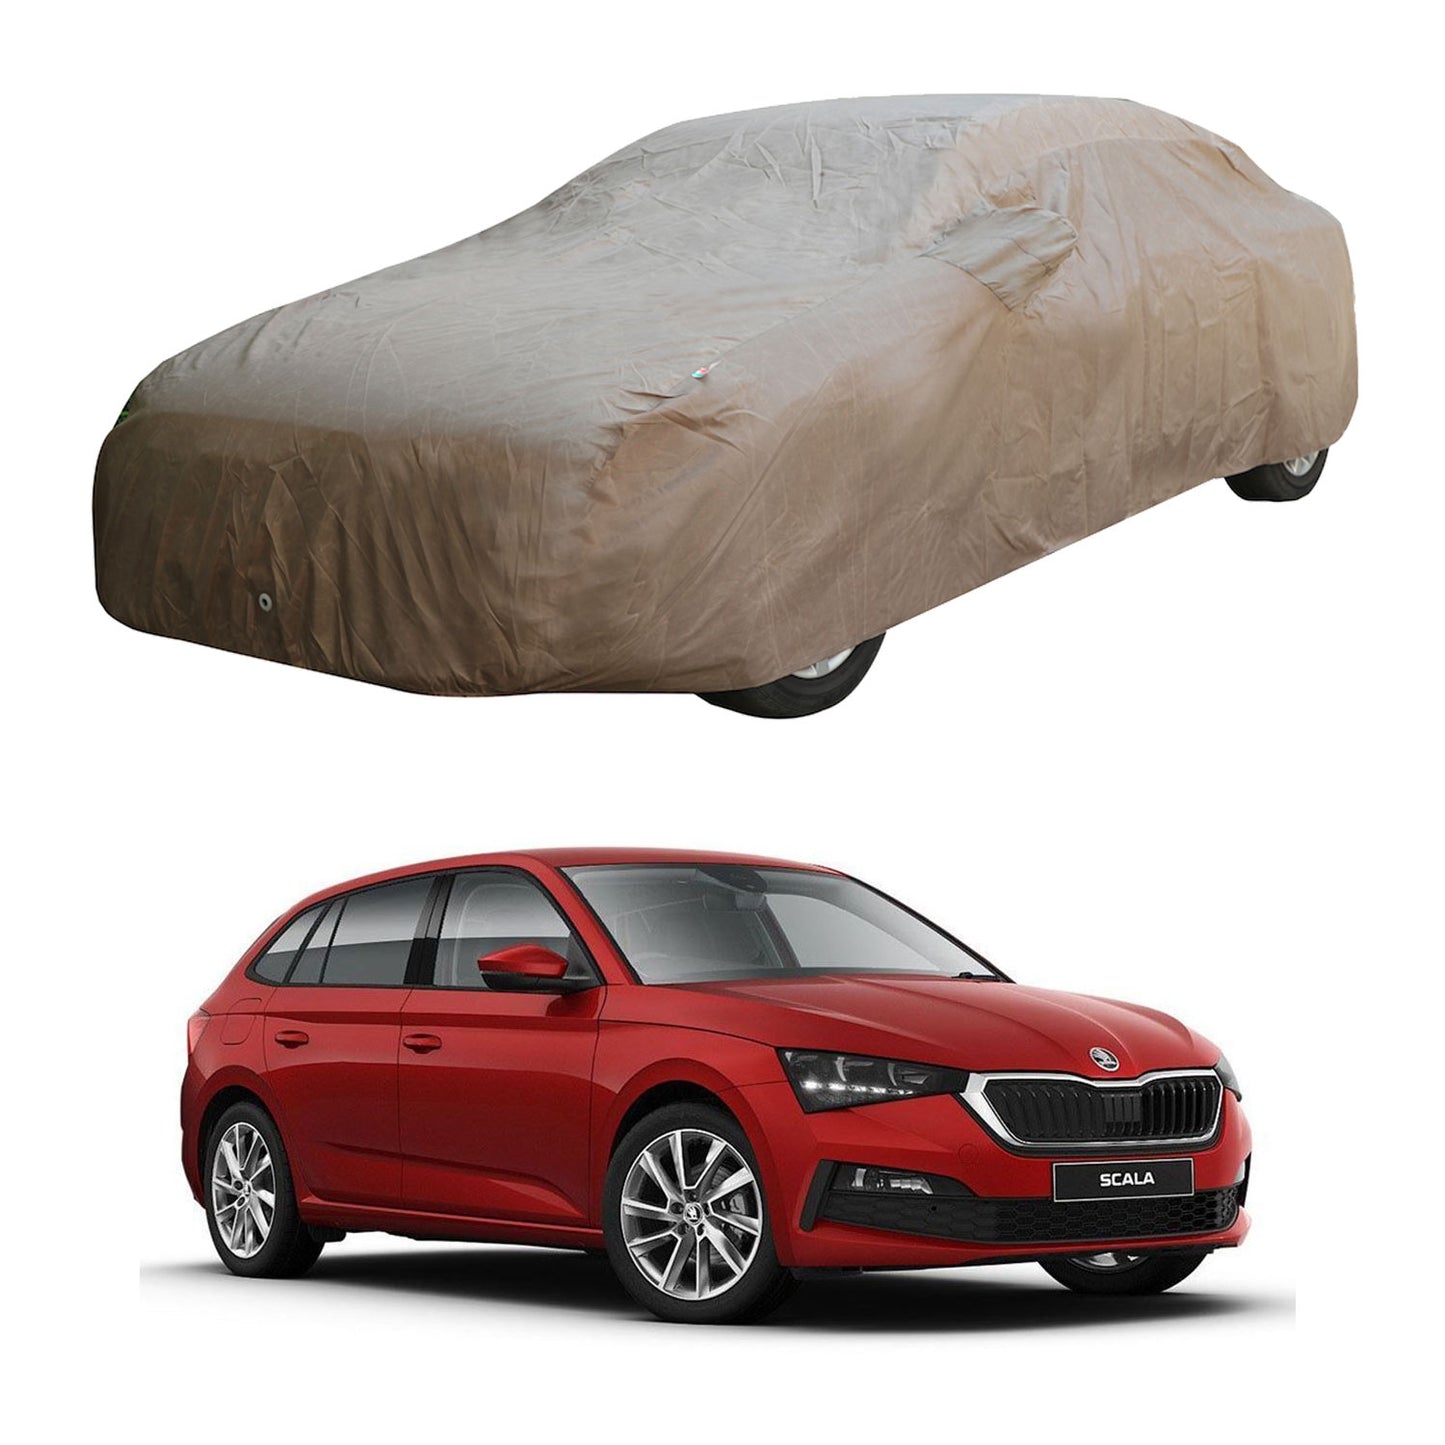 Oshotto Brown 100% Waterproof Car Body Cover with Mirror Pockets For Renault Scala/Fluence